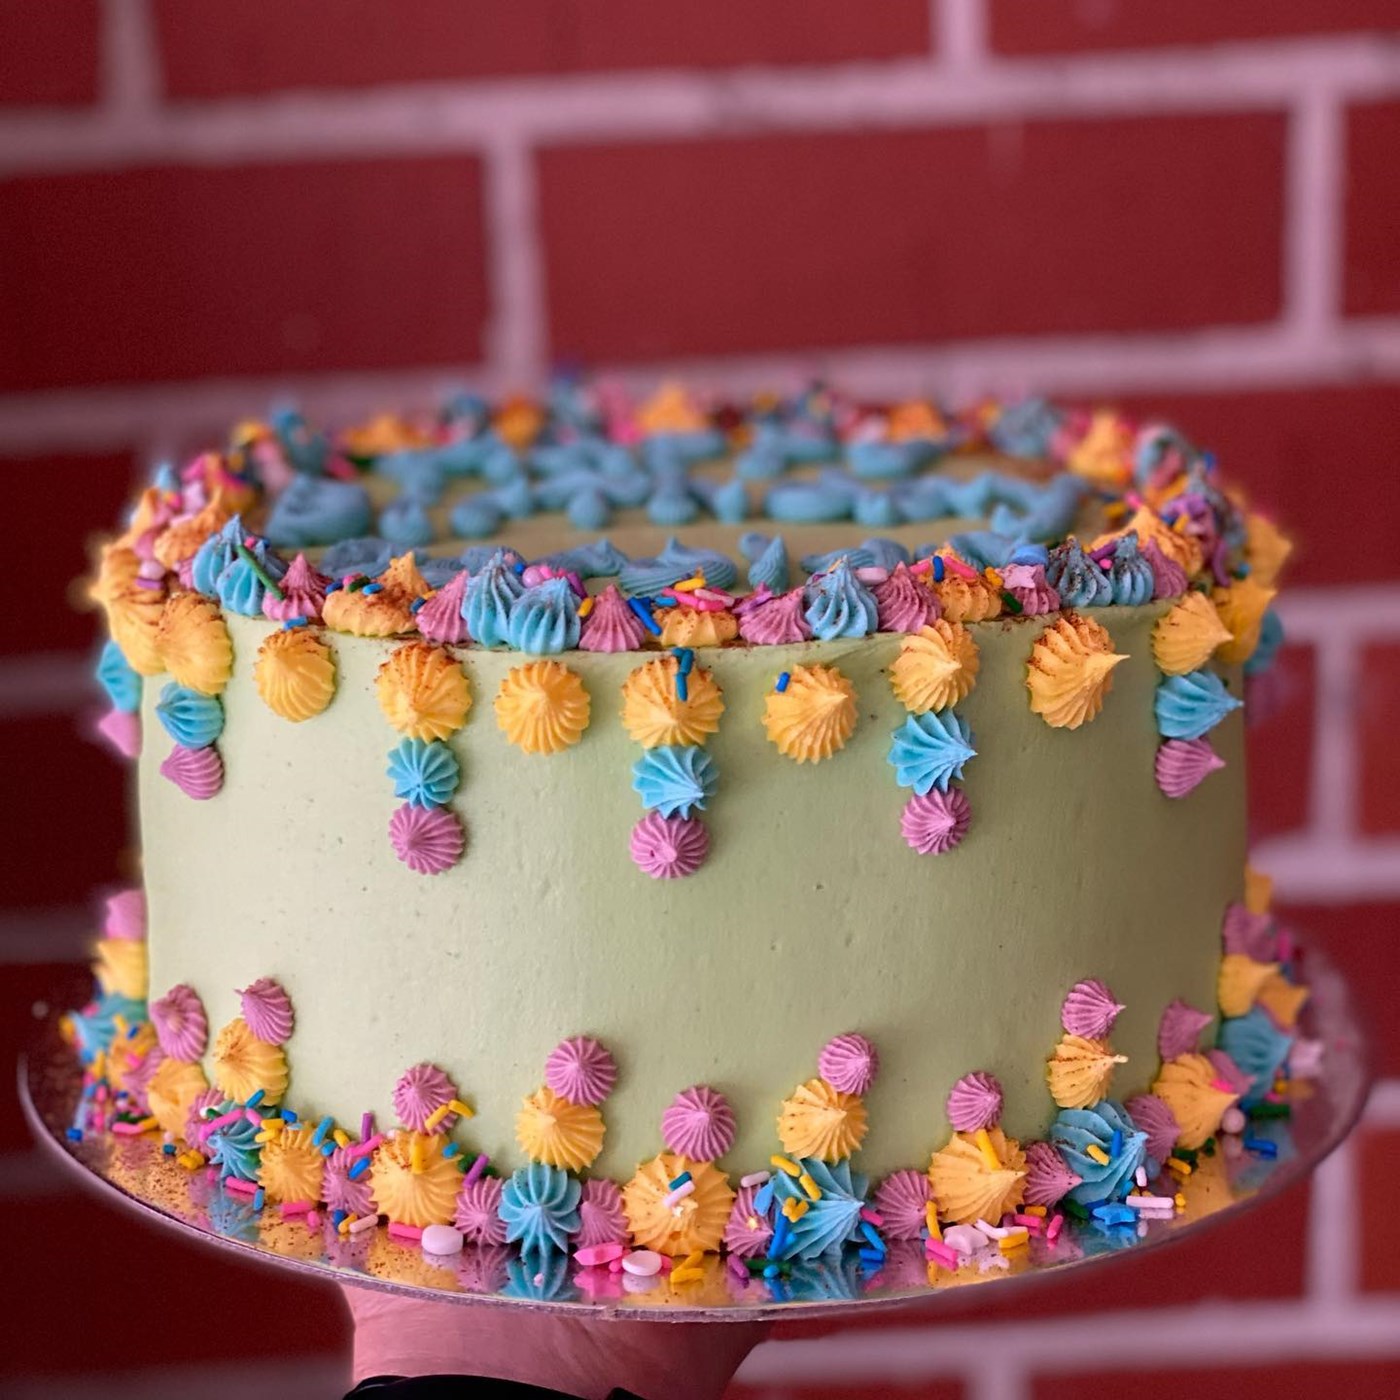 A cream caked with small purple, orange, blue and pink decorations piped all over. From Sweet Bones Bakery & Cafe